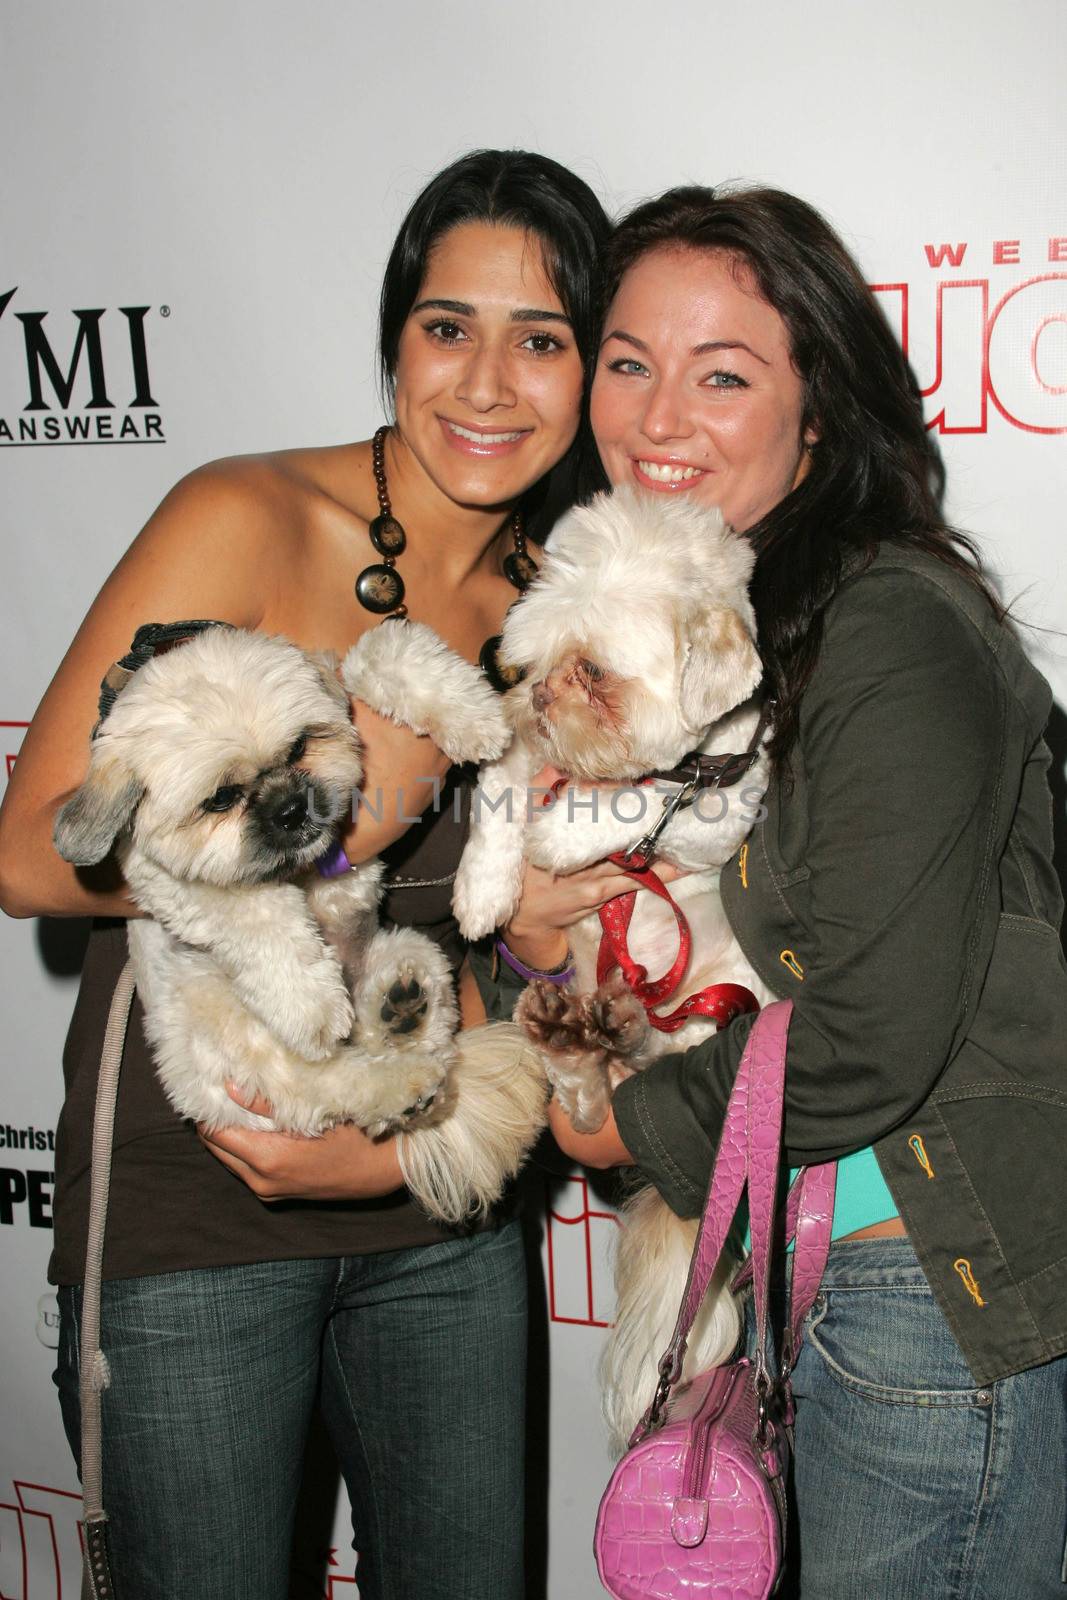 Sasa Jalali and Lindsey Labrum at the In Touch Presents Pets And Their Stars Party, Cabana Club, Hollywood, CA 09-21-05